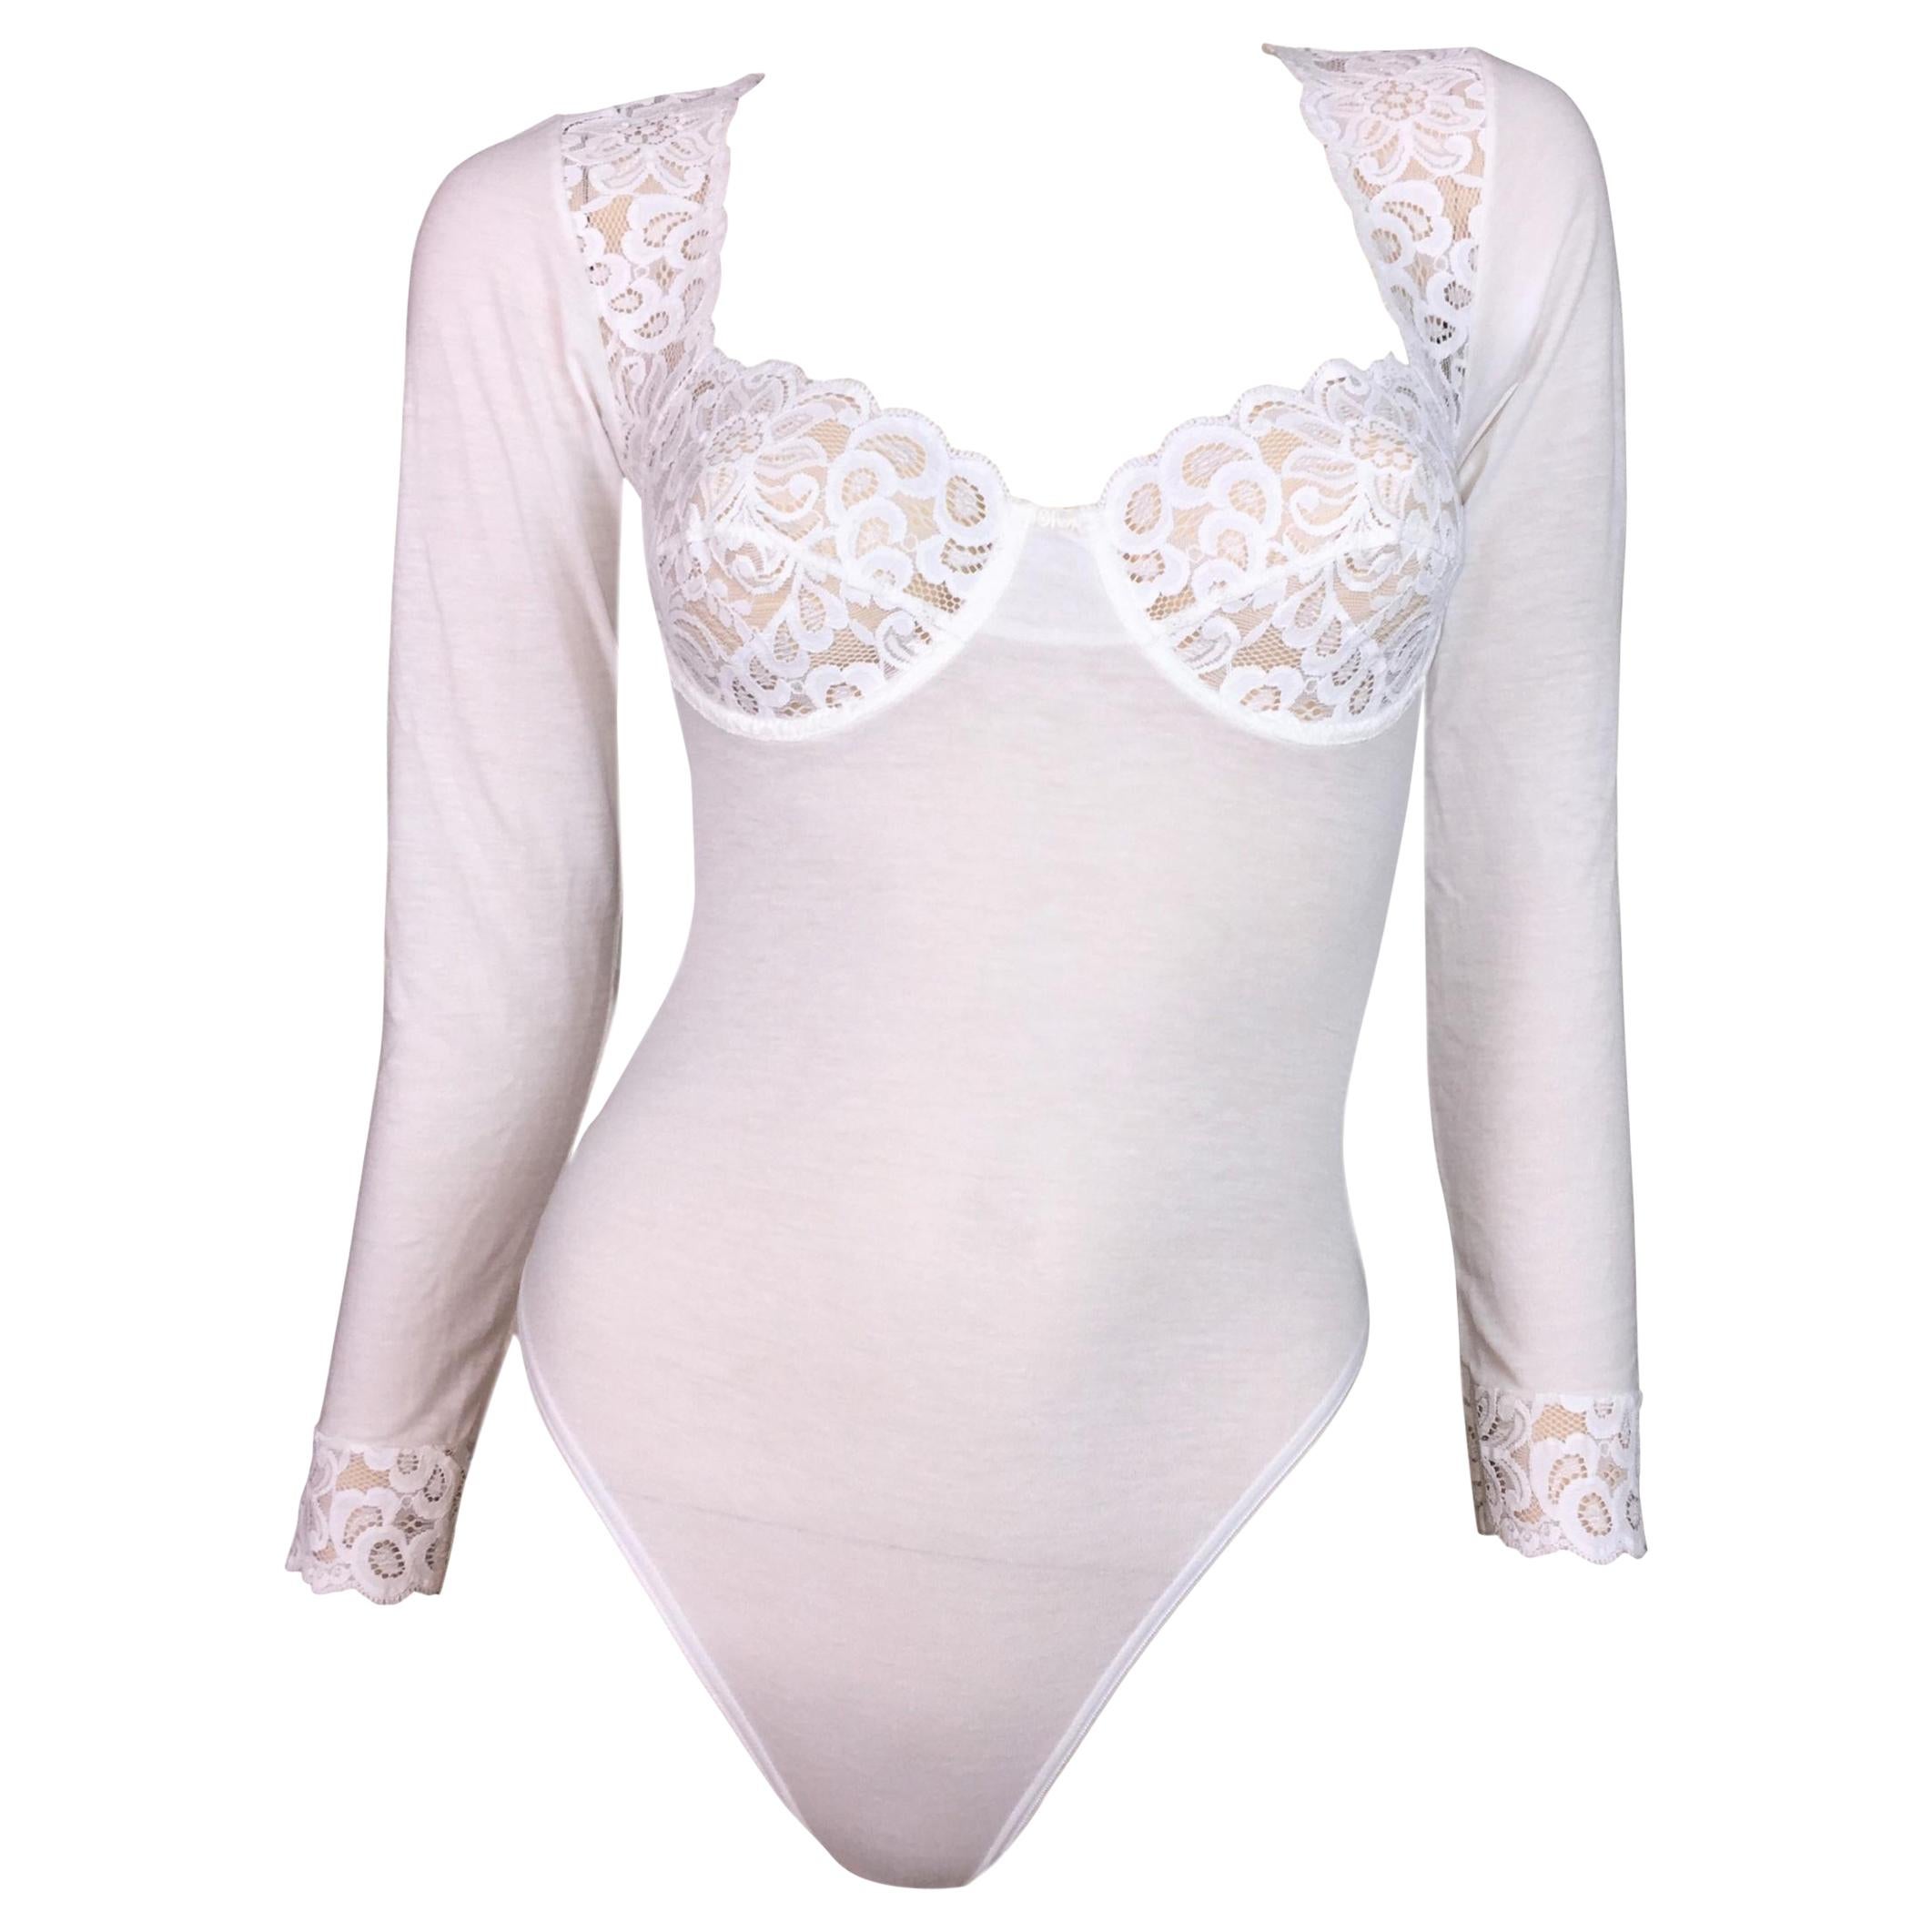 NWT 1990's Christian Dior Sheer White Lace Bodysuit Top